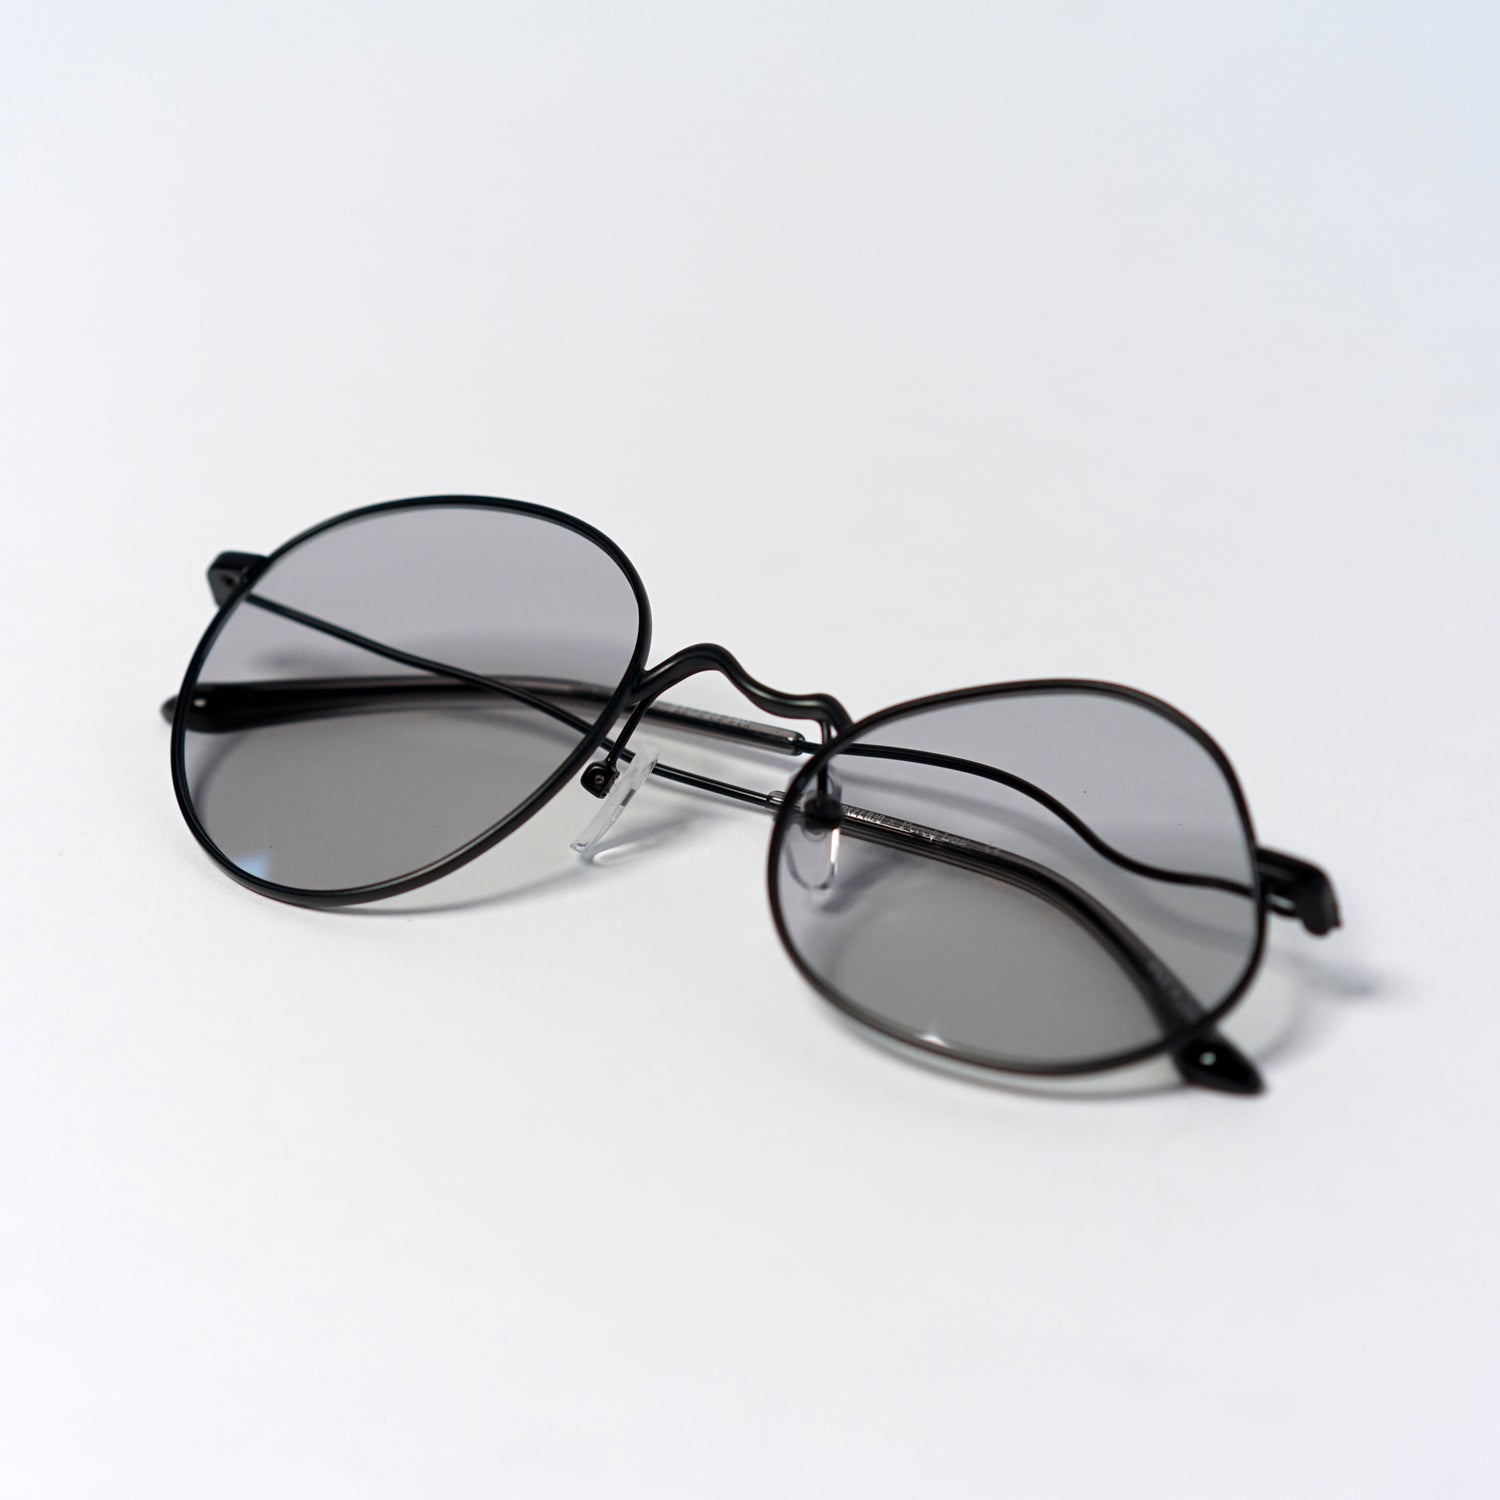 liquified round frames in matte black with grey polaroid lens temples folded up